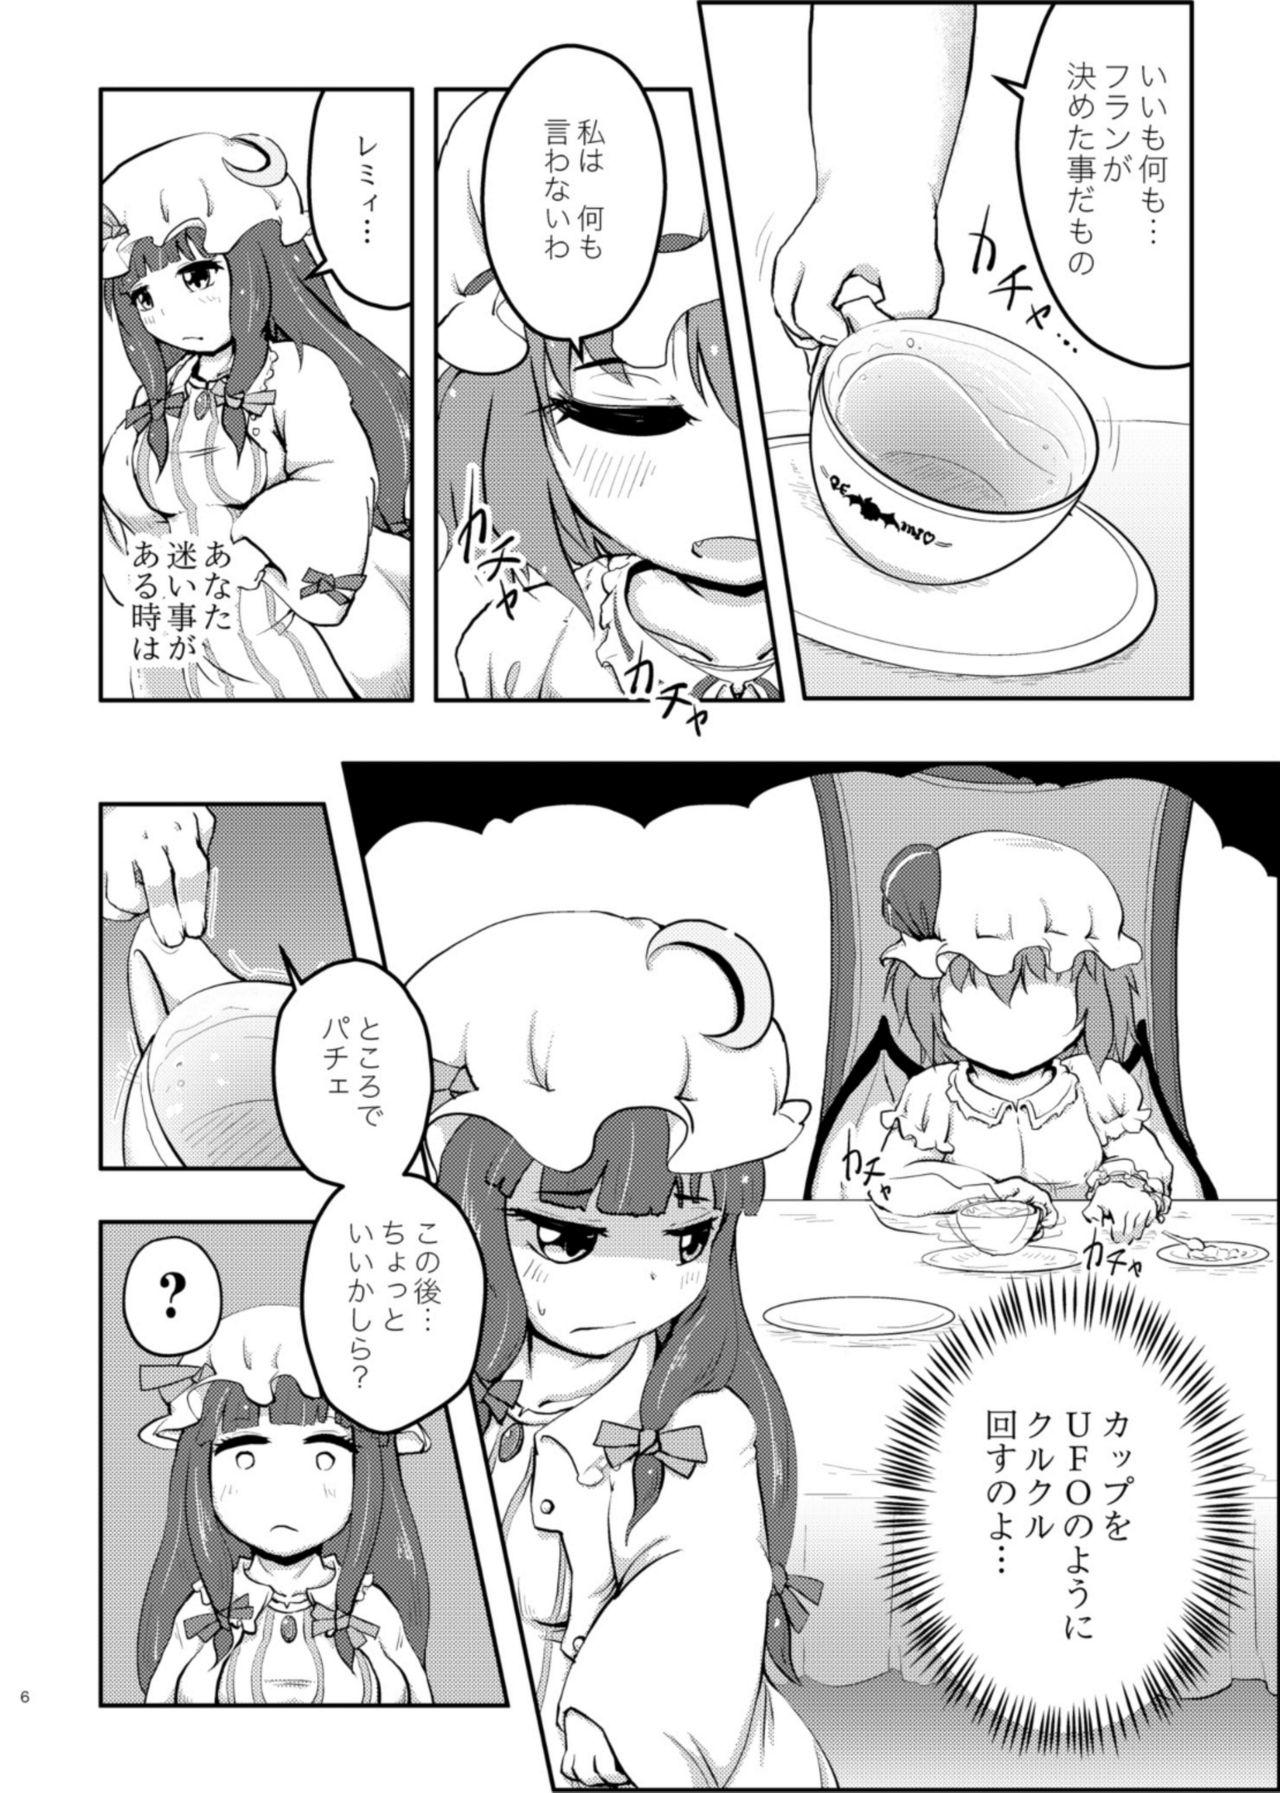 Tgirl Scarlet Conflict 2 - Touhou project Dirty Talk - Page 6